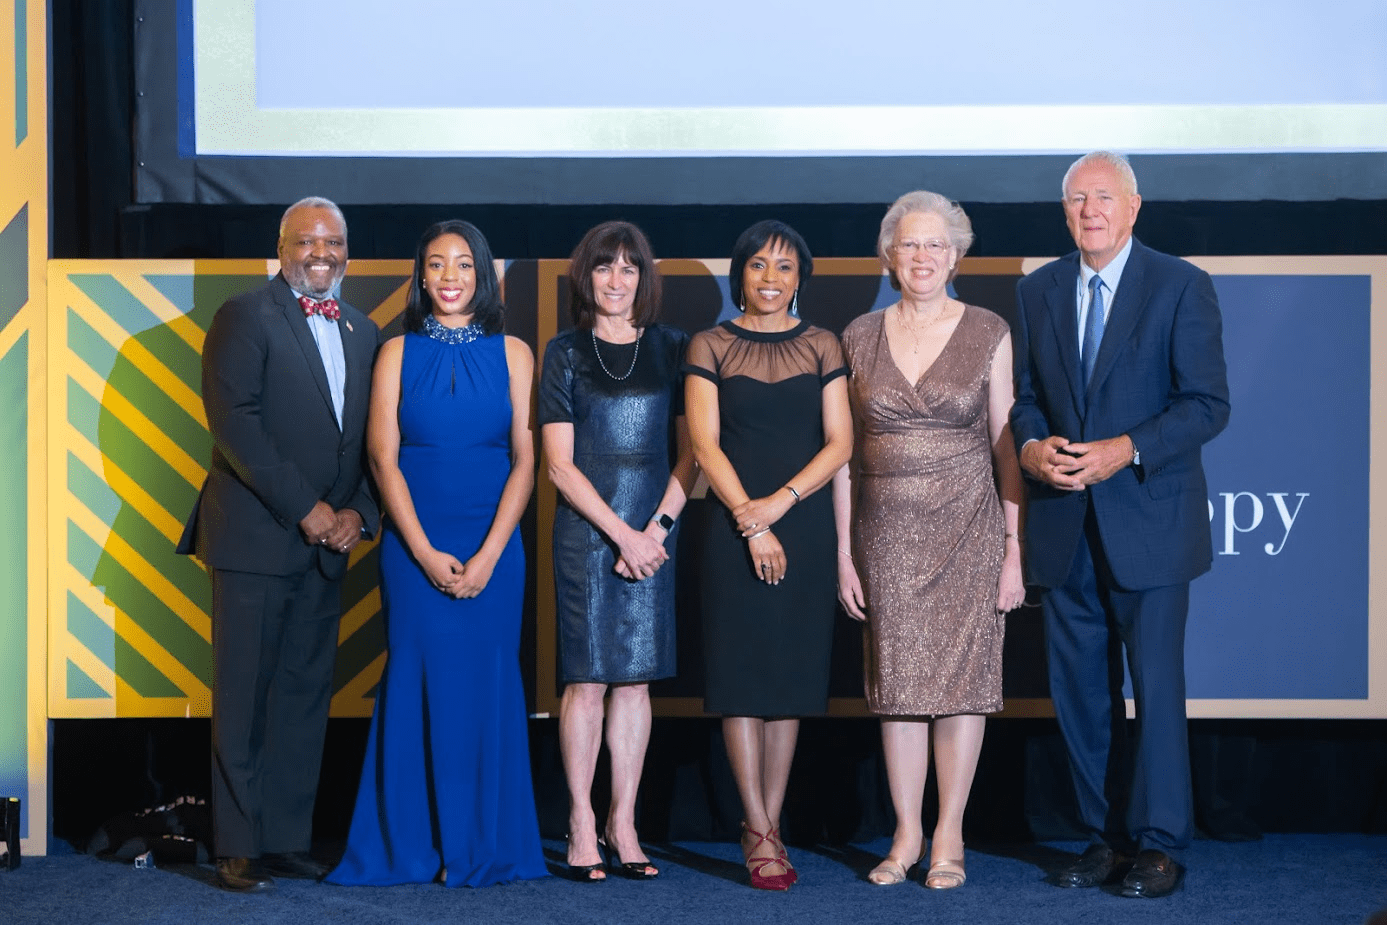 All Stars Night: Celebrating Leadership and Partnership in Prince George’s County